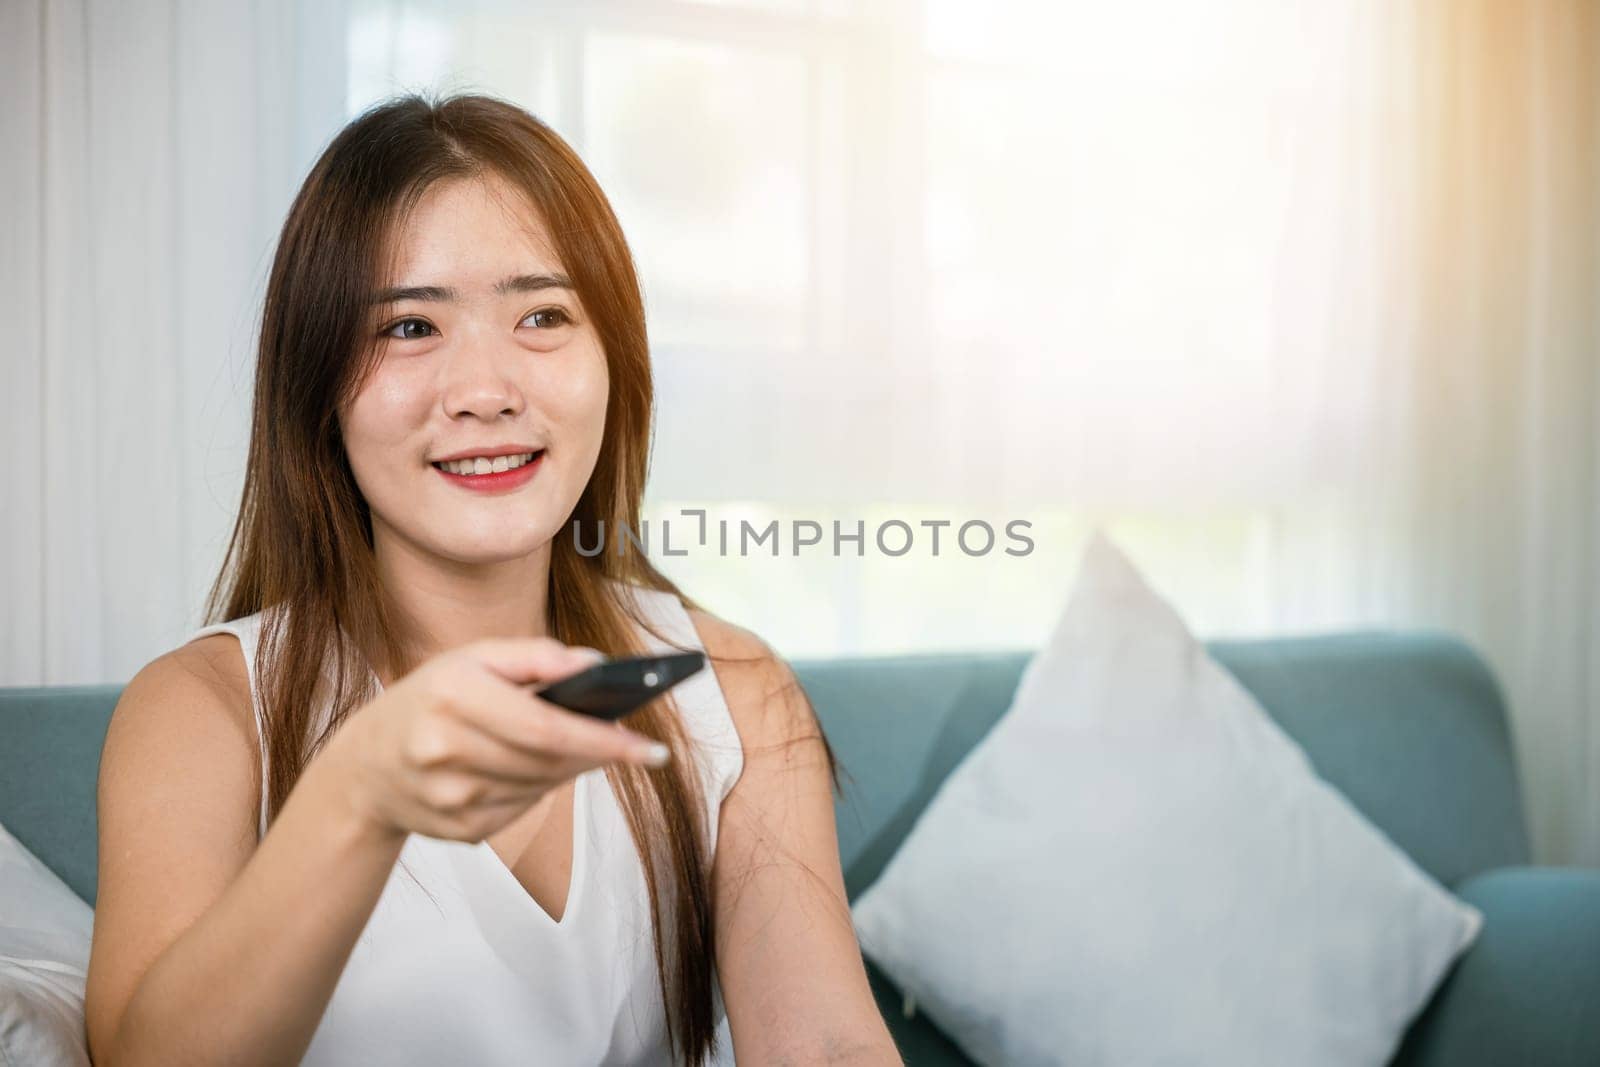 Beautiful female person look movie holding remote controller watching television, woman smiling sit relaxing watch TV hold remote control looking news on sofa in living room, entertainment lifestyles